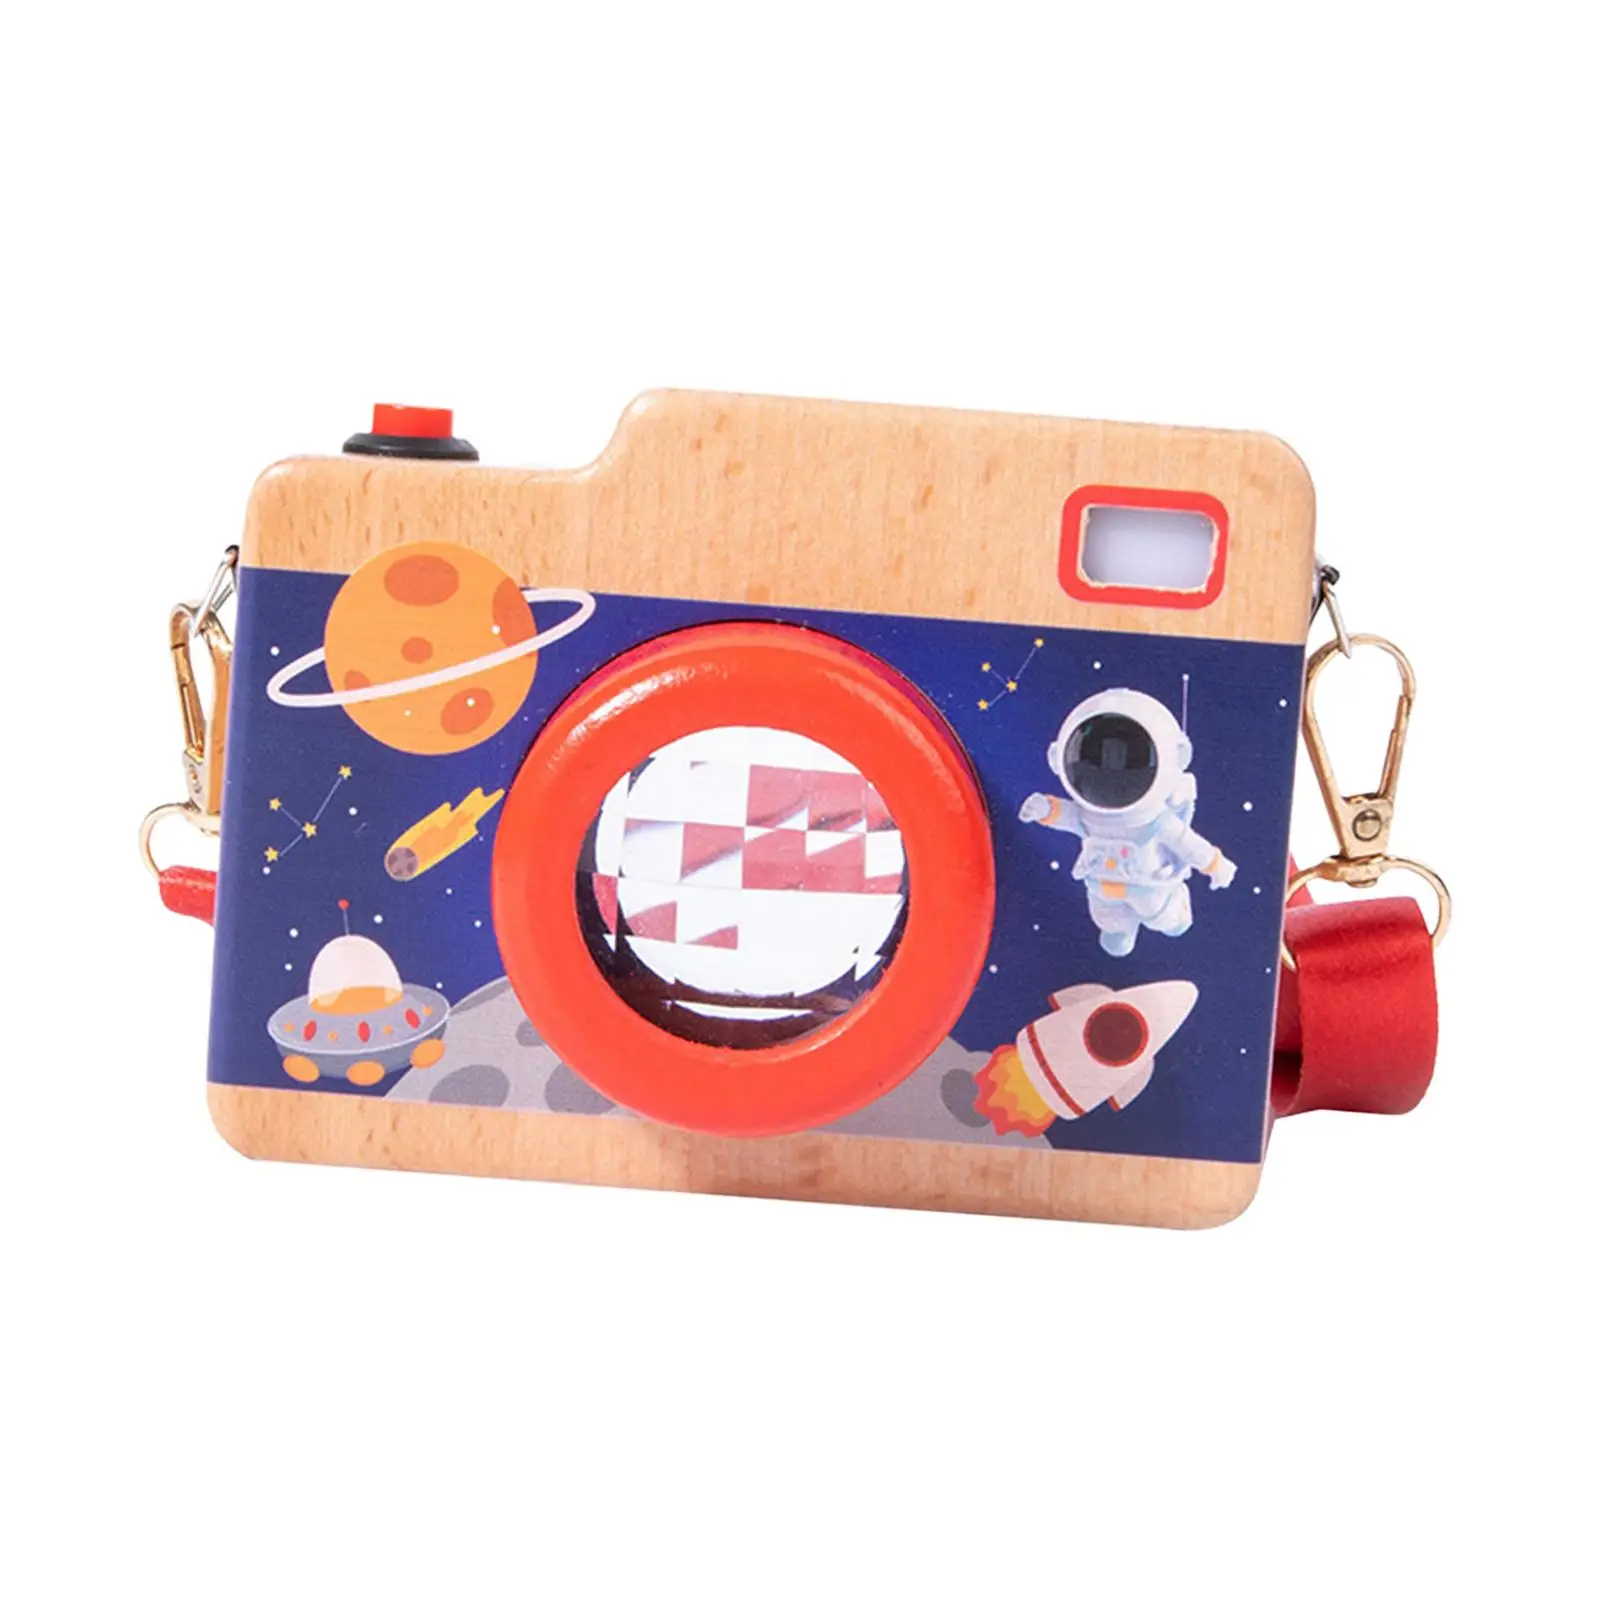 Wood Pretend Camera Unique Fashion Clothing Accessory Pretend Time Play for Party Toy Kids Toy Intelligent Toys Birthday Child